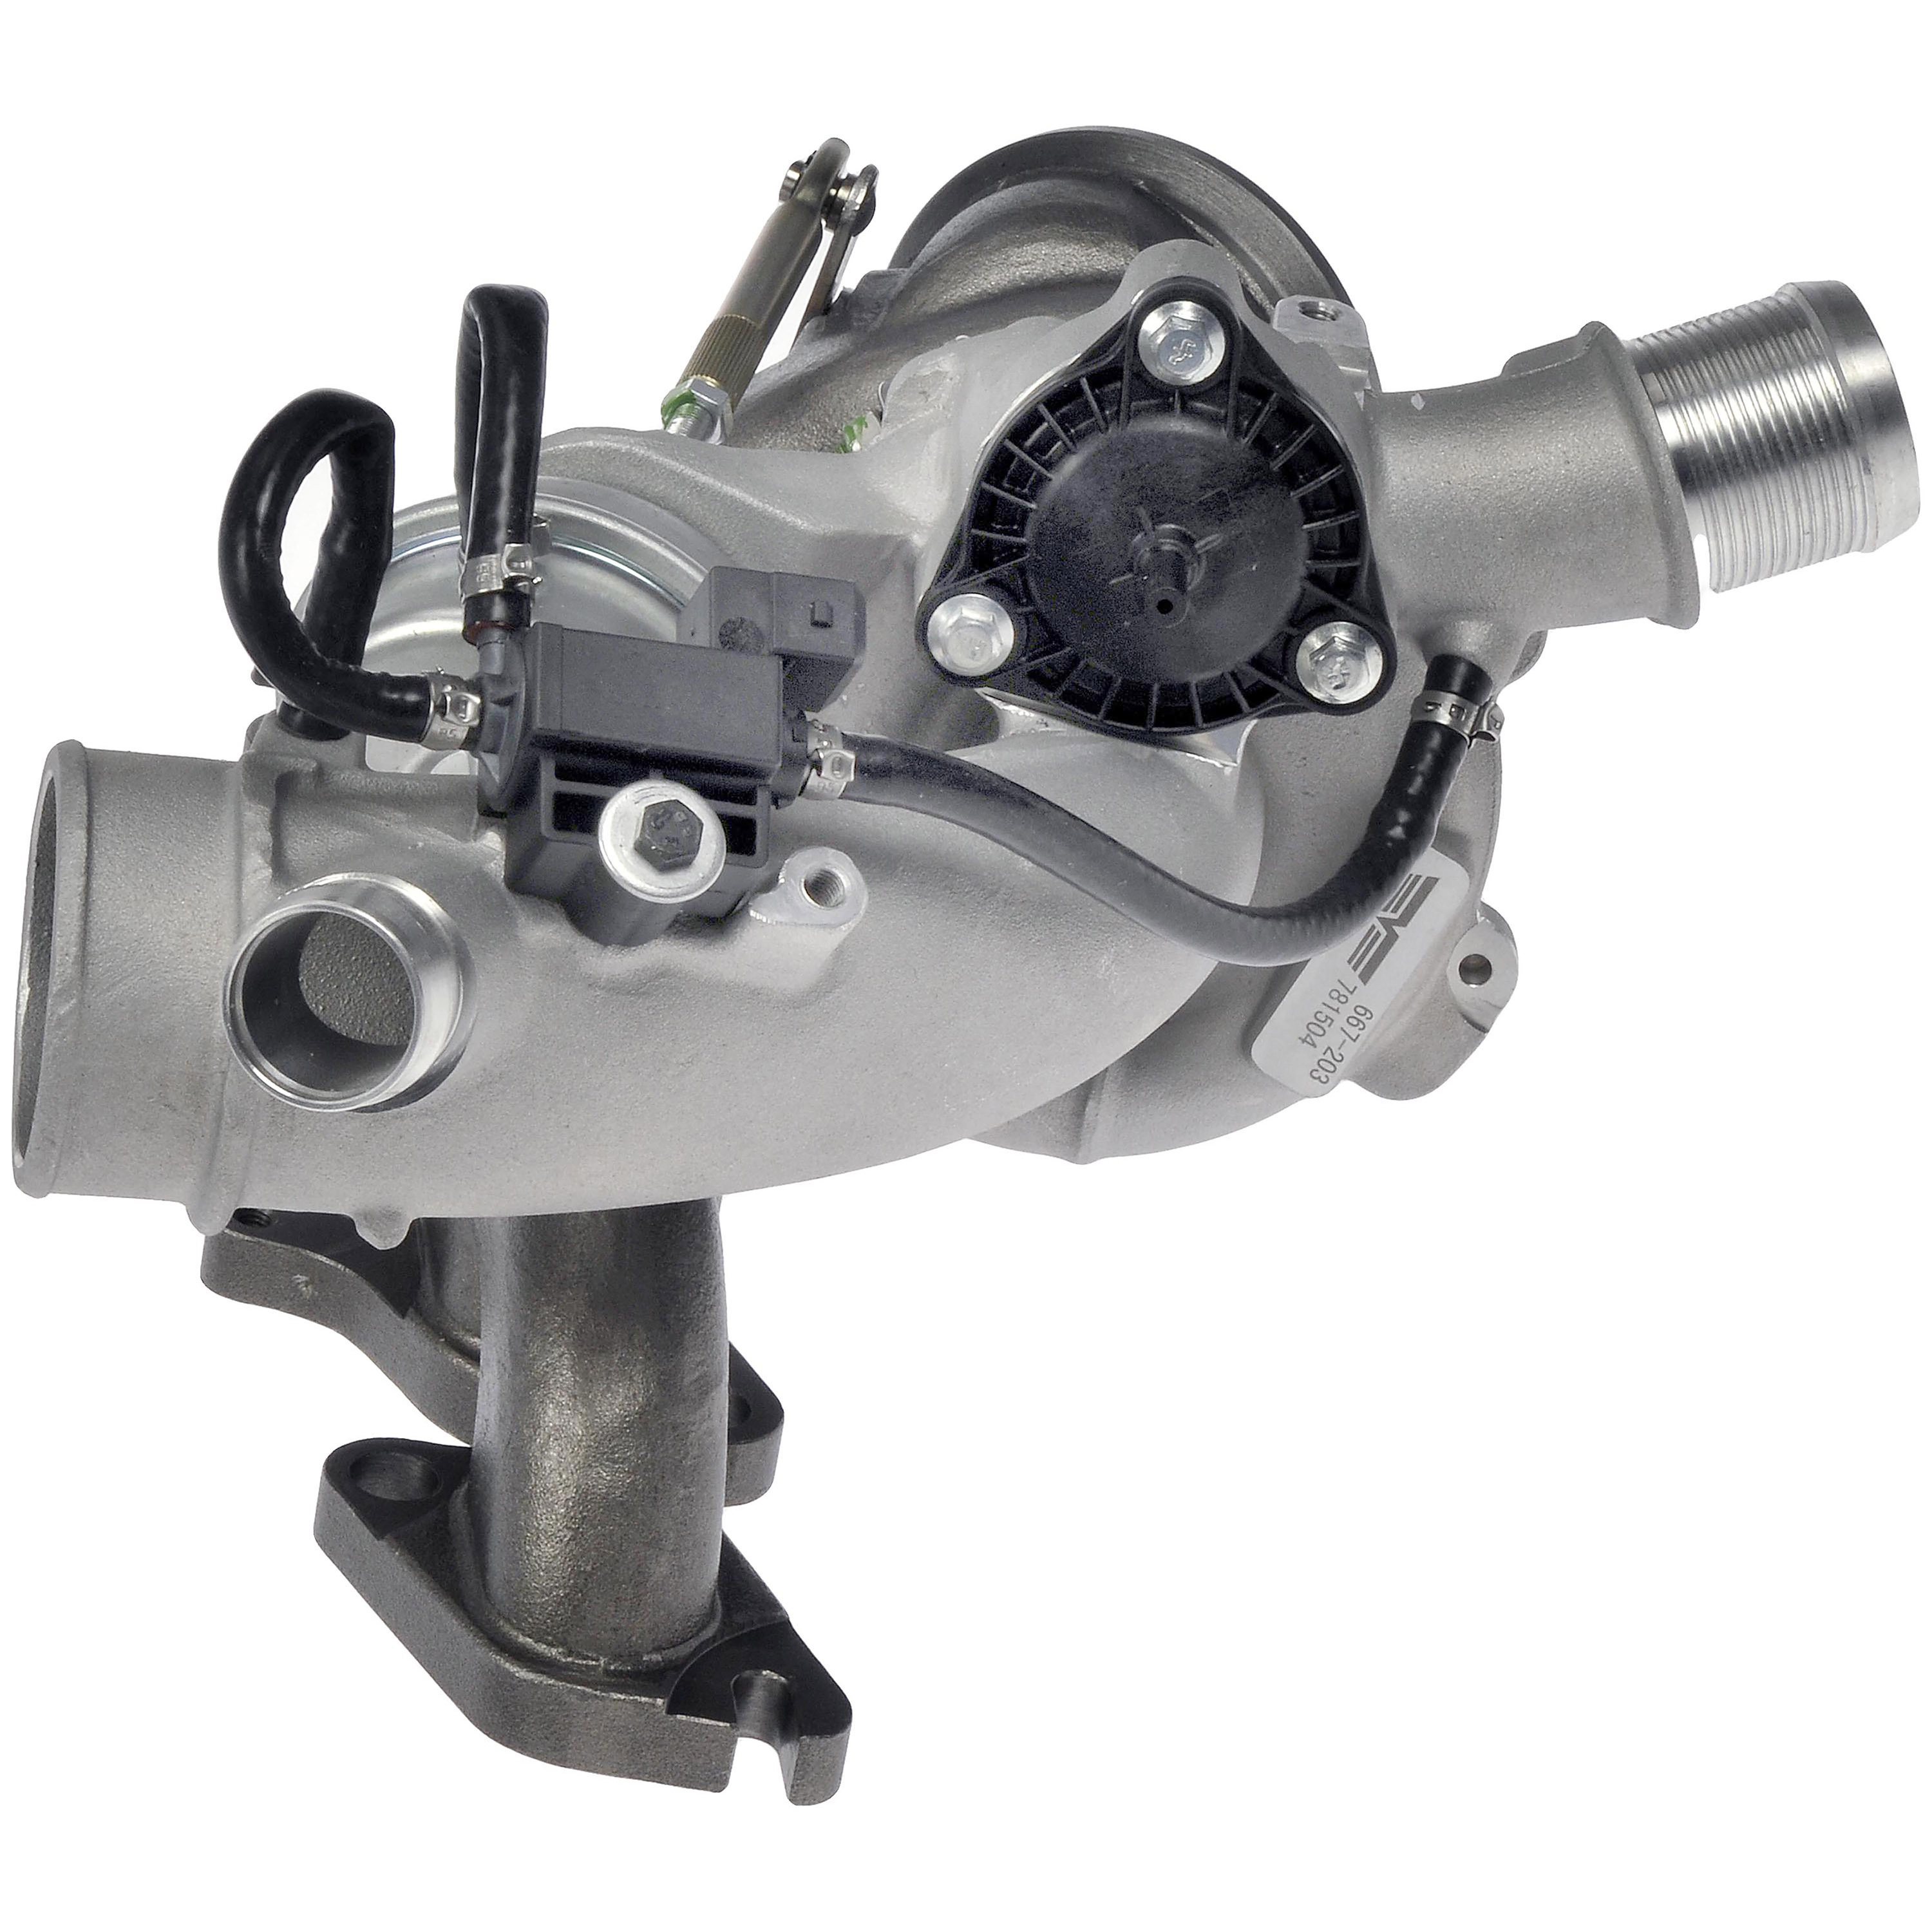 Dorman 667-203 Turbocharger for Specific Buick Chevrolet Models Fits  select: 2011-2015 CHEVROLET CRUZE, 2015-2019 CHEVROLET TRAX